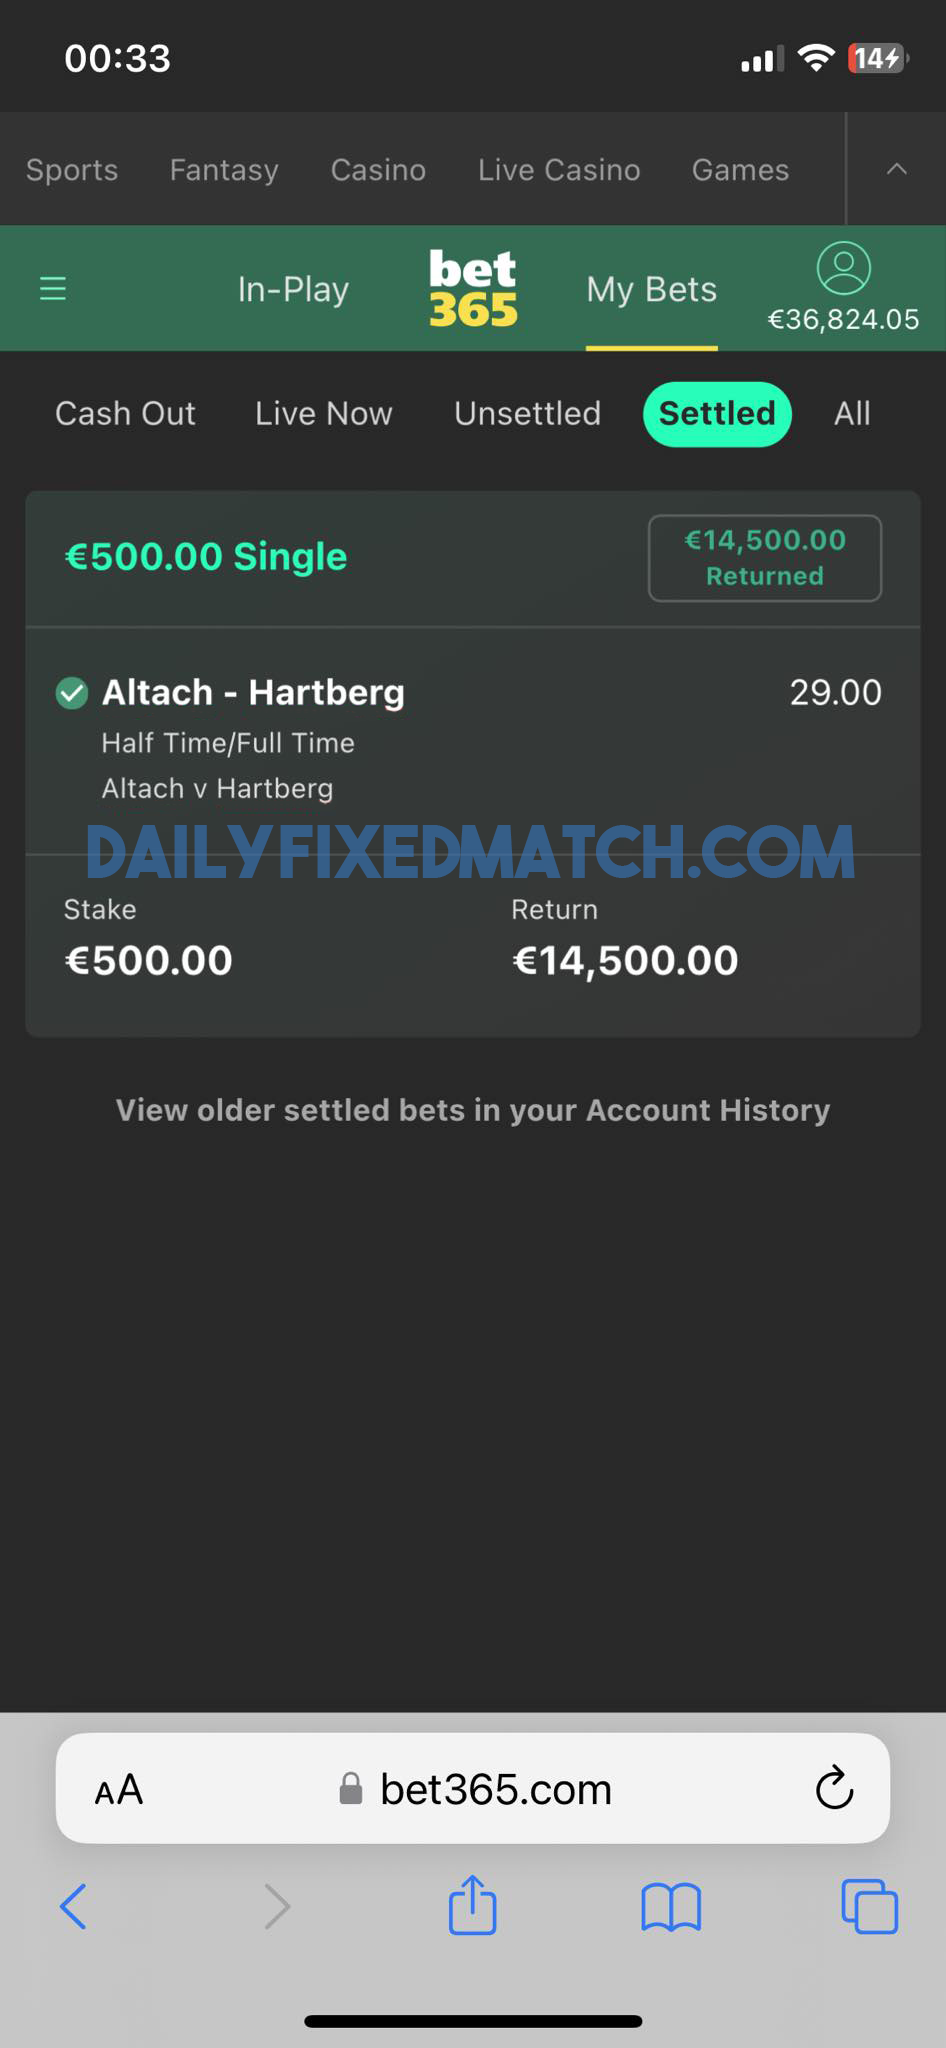 HT FT Fixed Matches